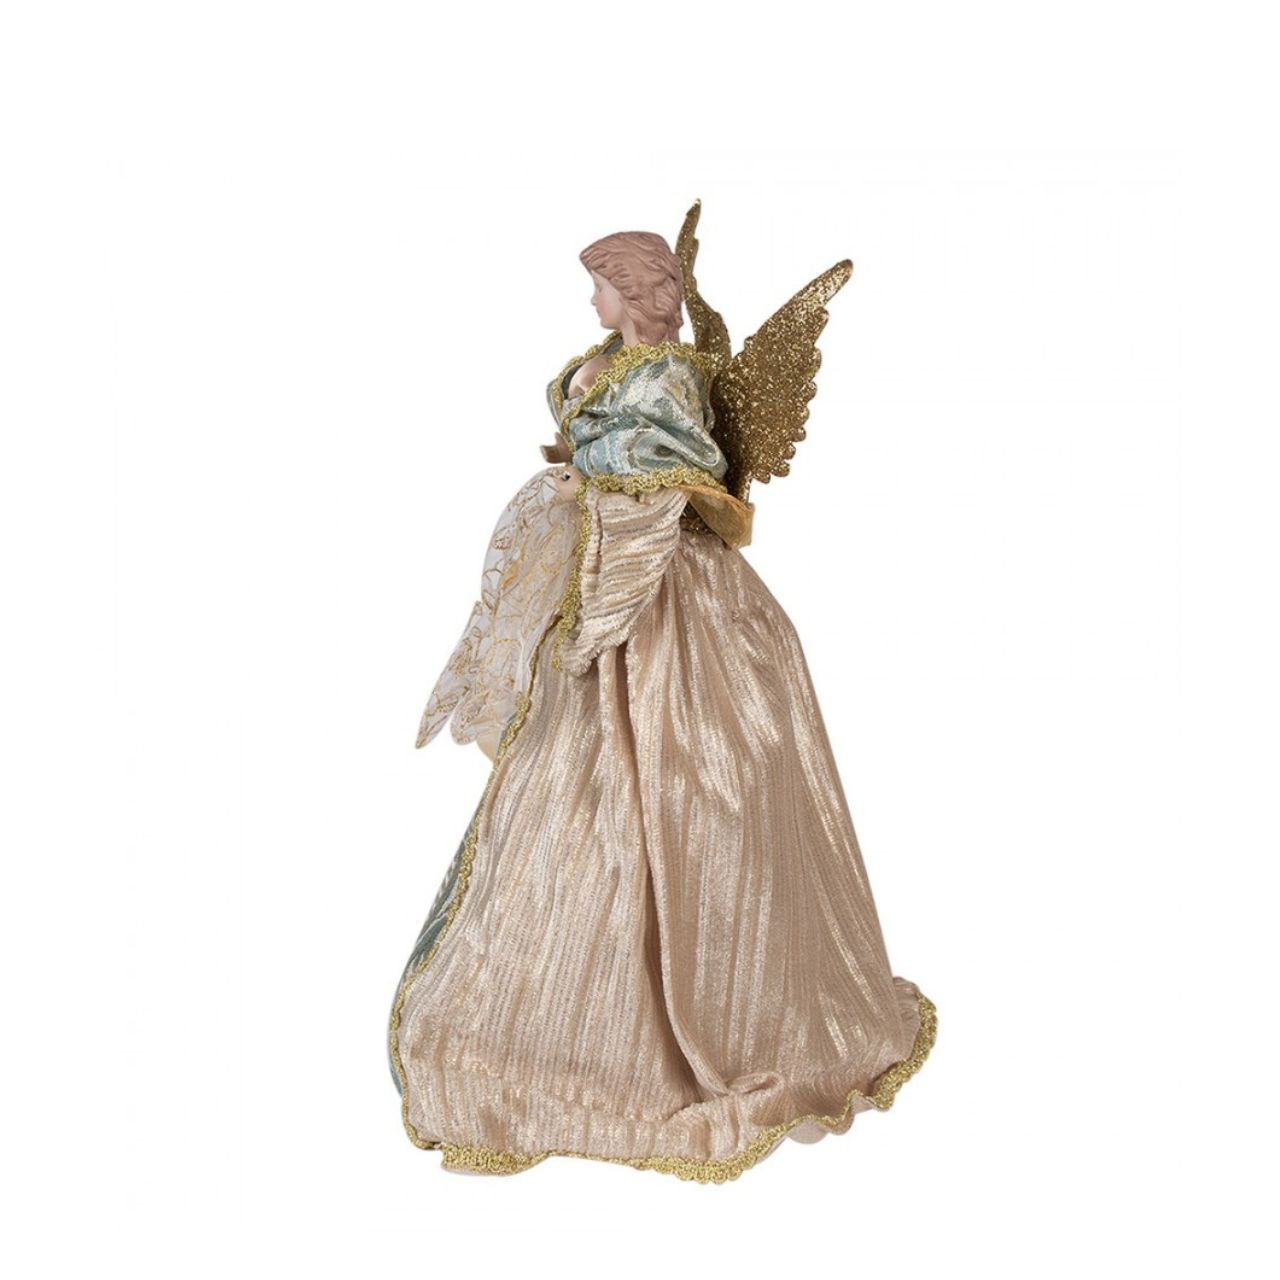 This christmas figurine is for the true lover. It’s not just for the holidays, but can easily stay all year round. Place this figurine in your home and you have a unique interior. And don’t worry, this christmas figurine fits into any interior style. Bring this religious figurine from Clayre & Eef into your home with style.